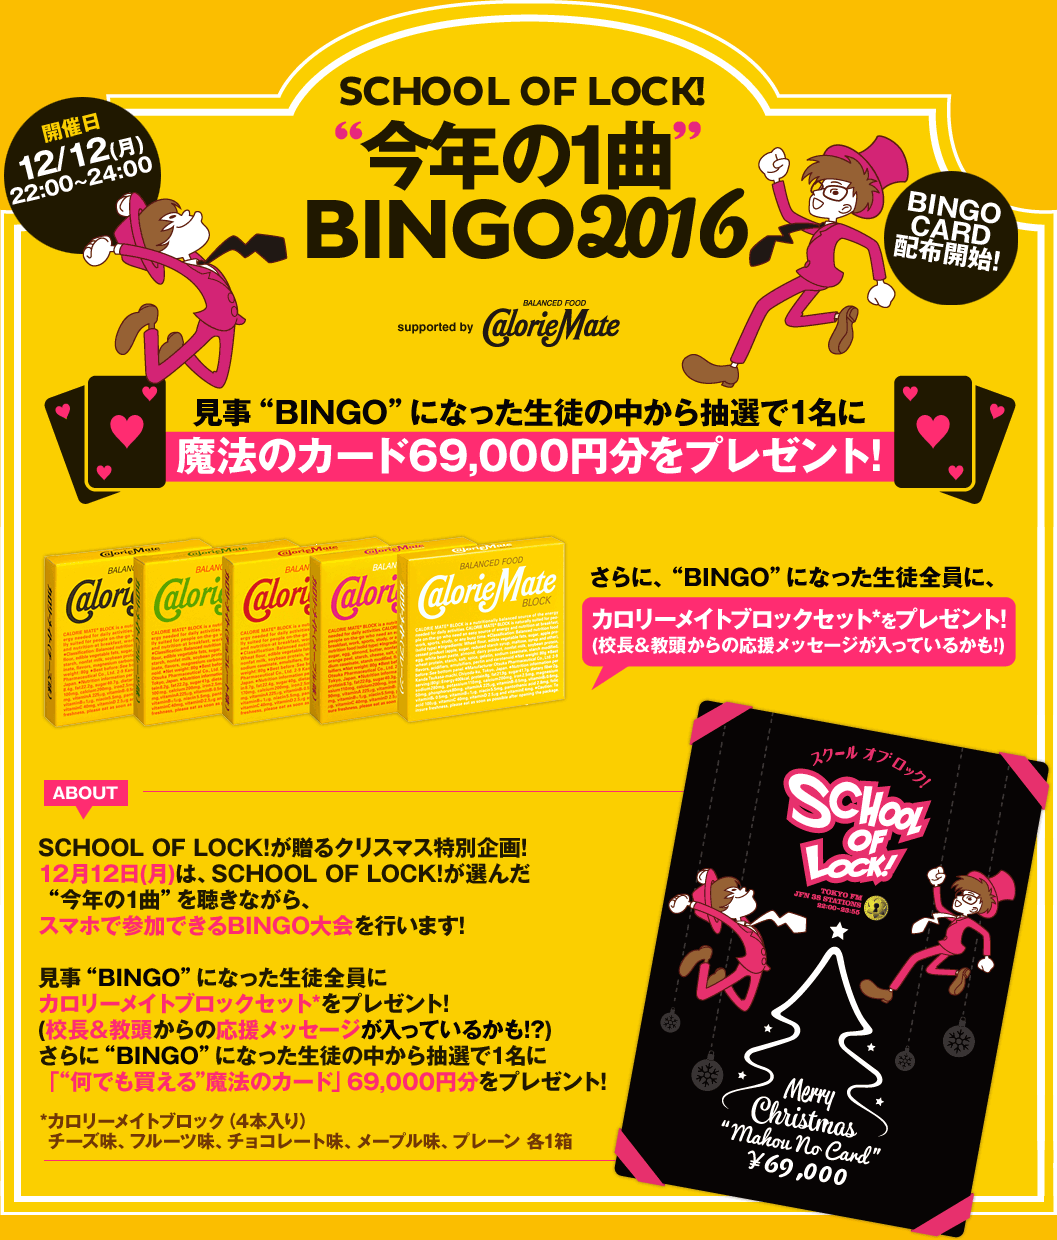 SCHOOL OF LOCK! | “今年の1曲”BINGO 2016 supported by カロリーメイト